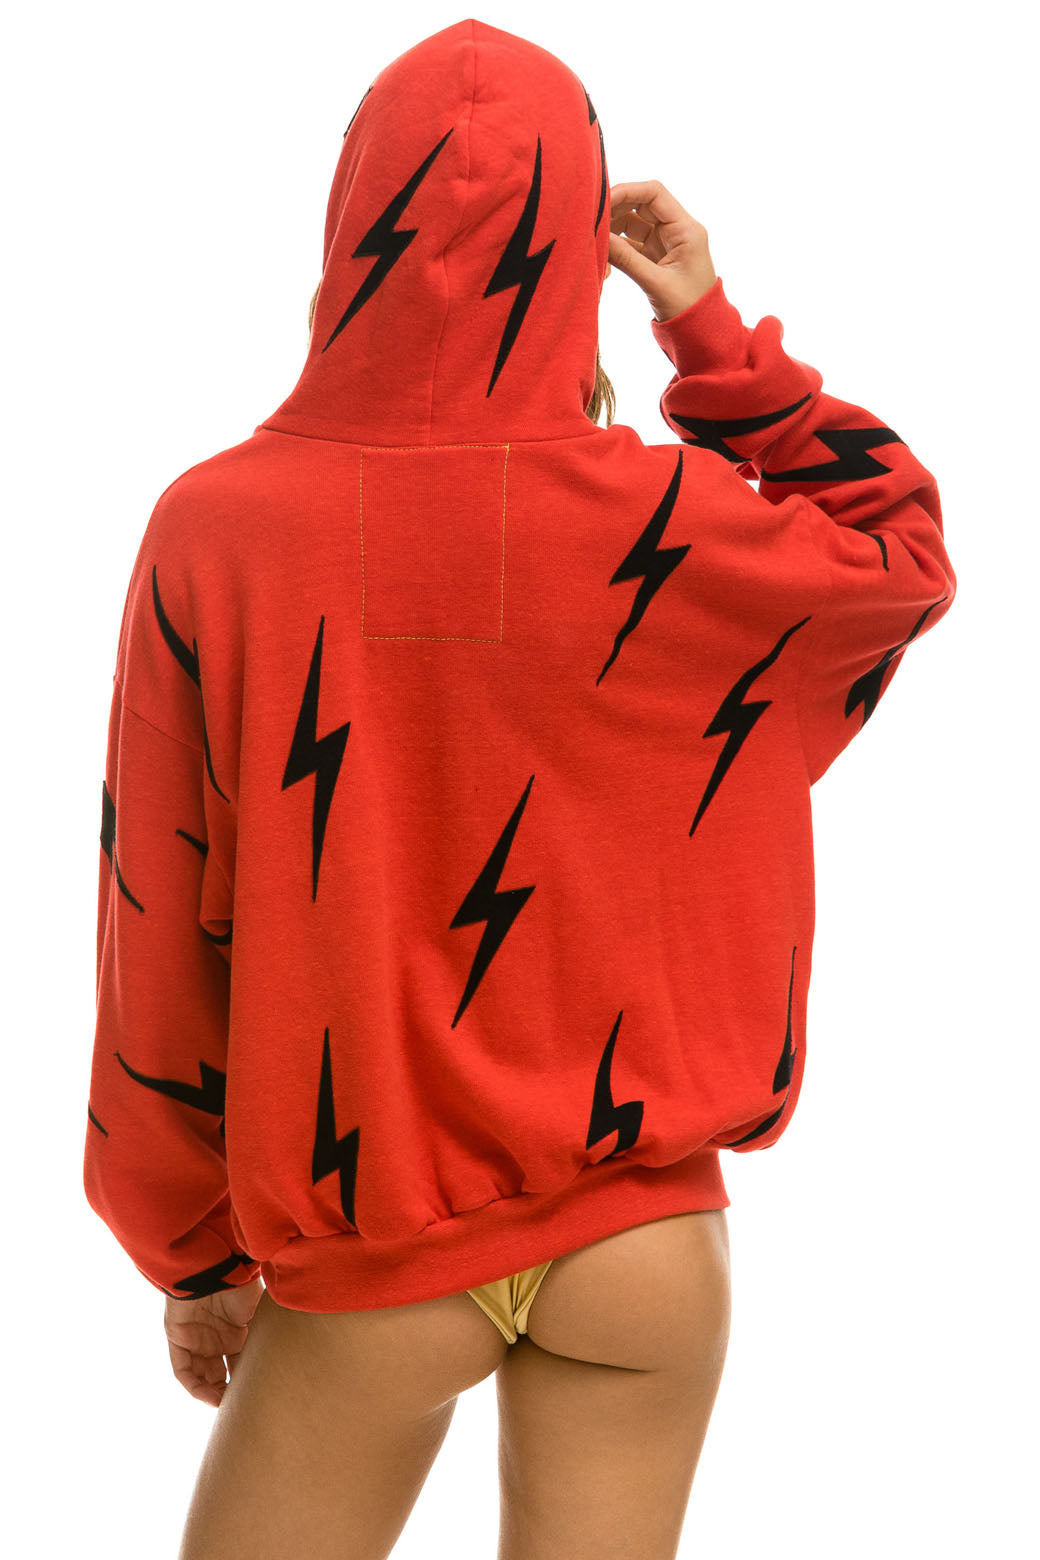 BOLT STITCH REPEAT RELAXED PULLOVER HOODIE WITH POCKET ZIPPERS - RED // BLACK Hoodie Aviator Nation 